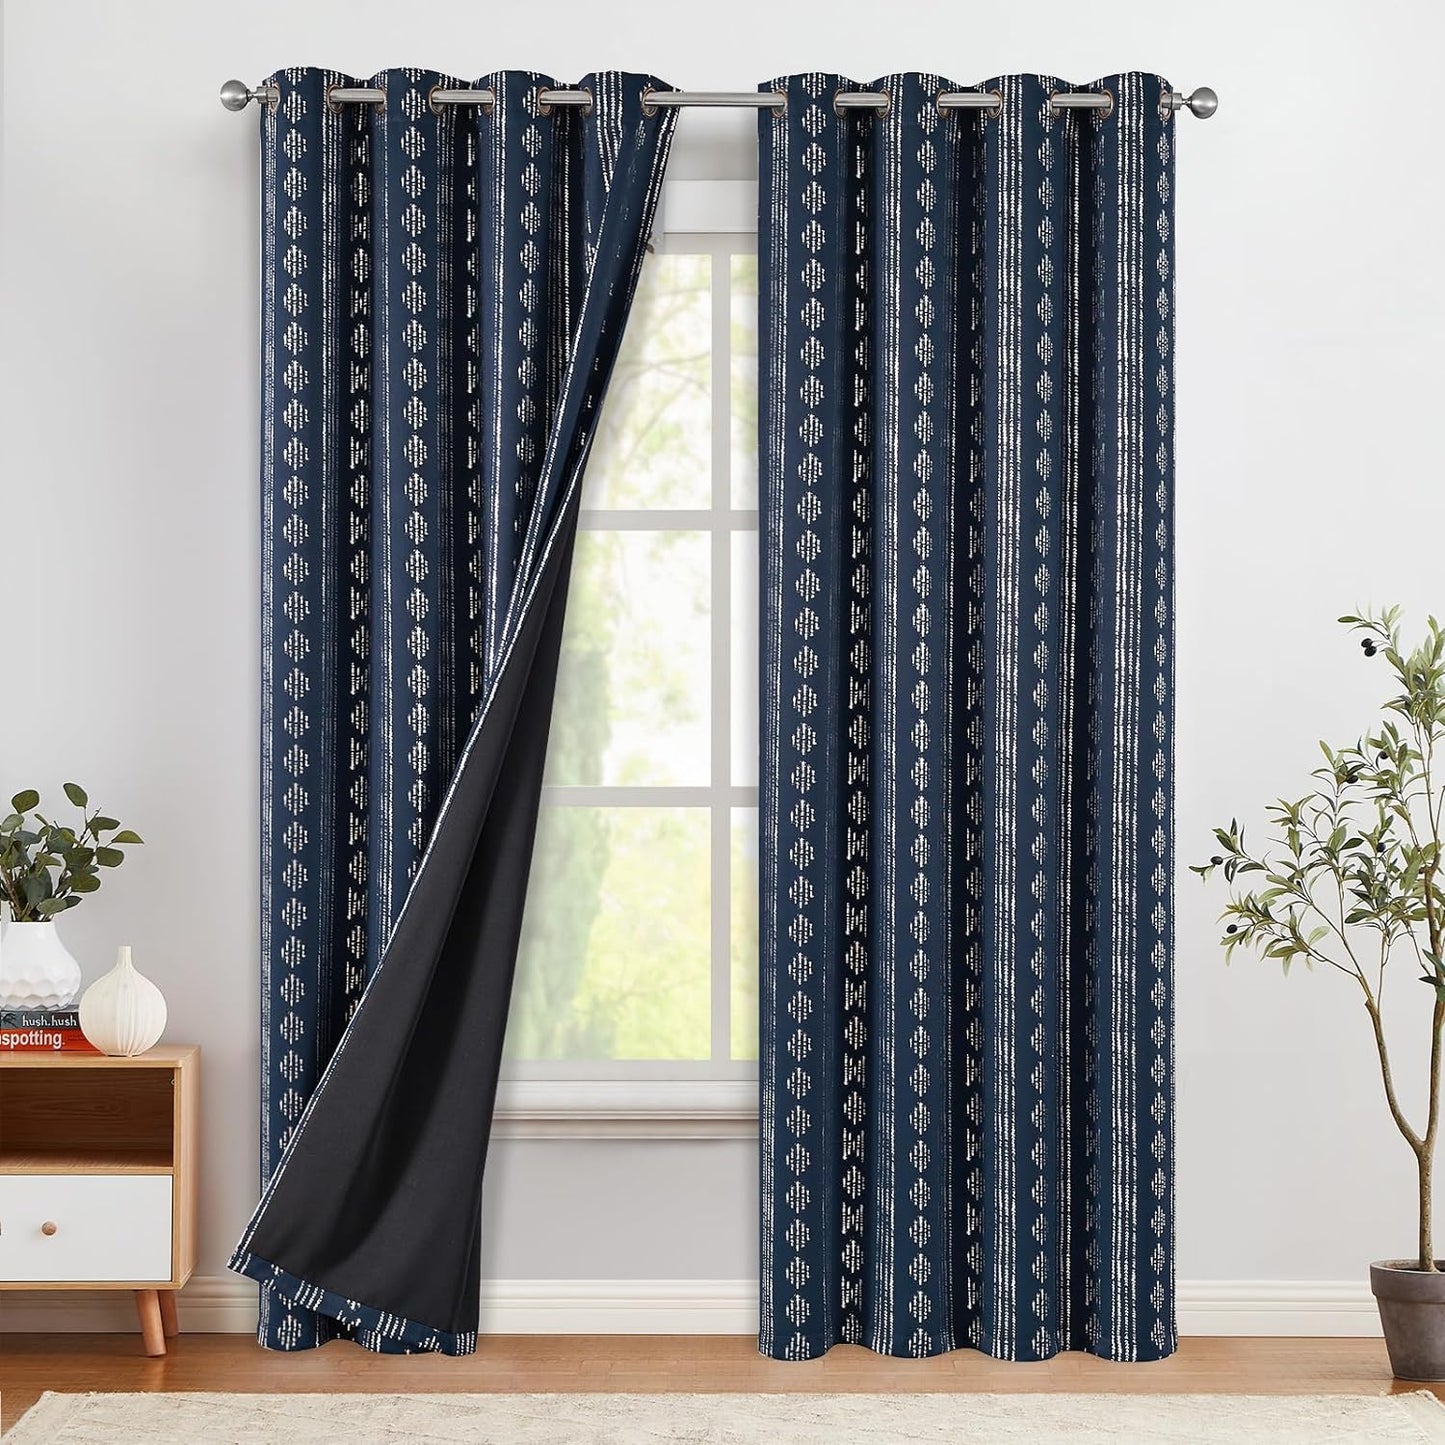 COLLACT 100% Boho Blackout Curtains for Bedroom 84 Inch Length Black on Beige Geometric Stripe Pattern Curtains for Living Room Thermal Insulated Room Darkening Drapes Grommet Window Curtains 2 Panels  COLLACT A3 | Silver Foil On Blue W52 X L84 